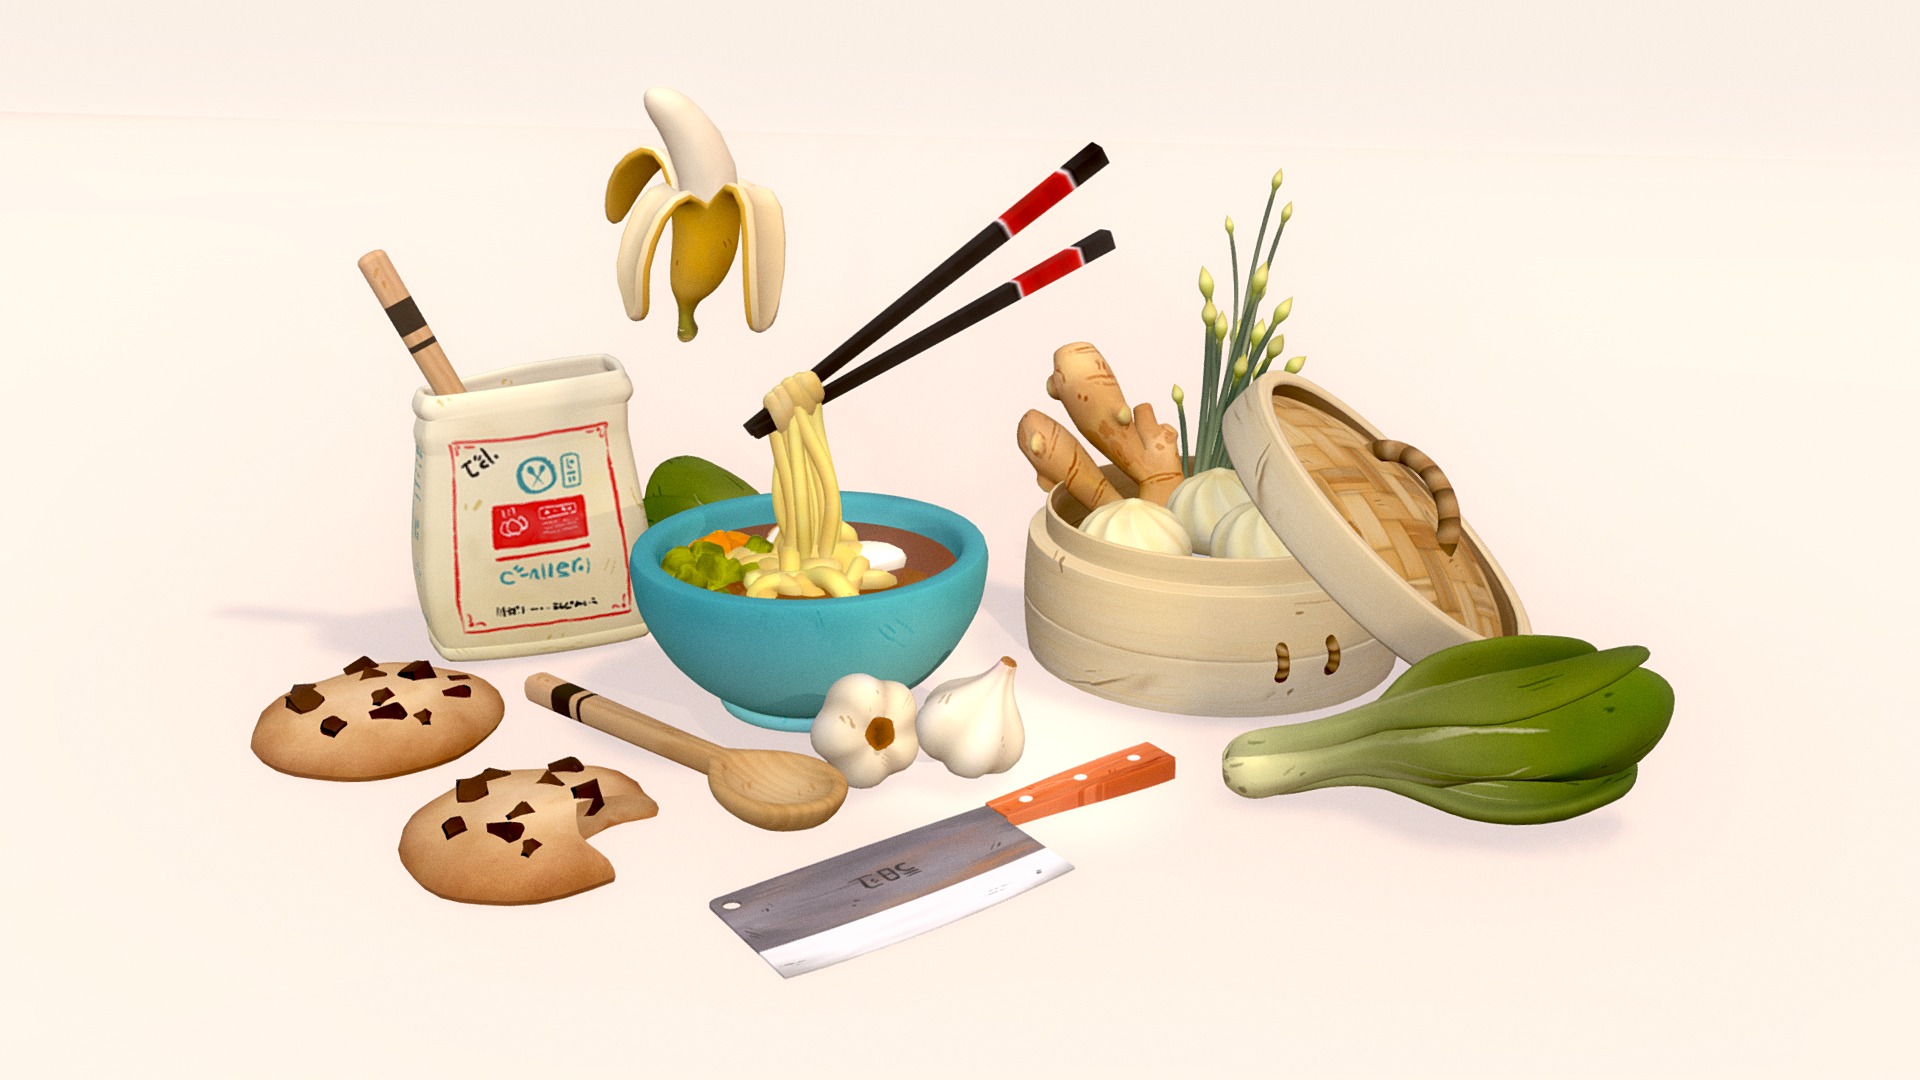 3D model From the Chubby Kitchen - This is a 3D model of the From the Chubby Kitchen. The 3D model is about a variety of kitchen items.